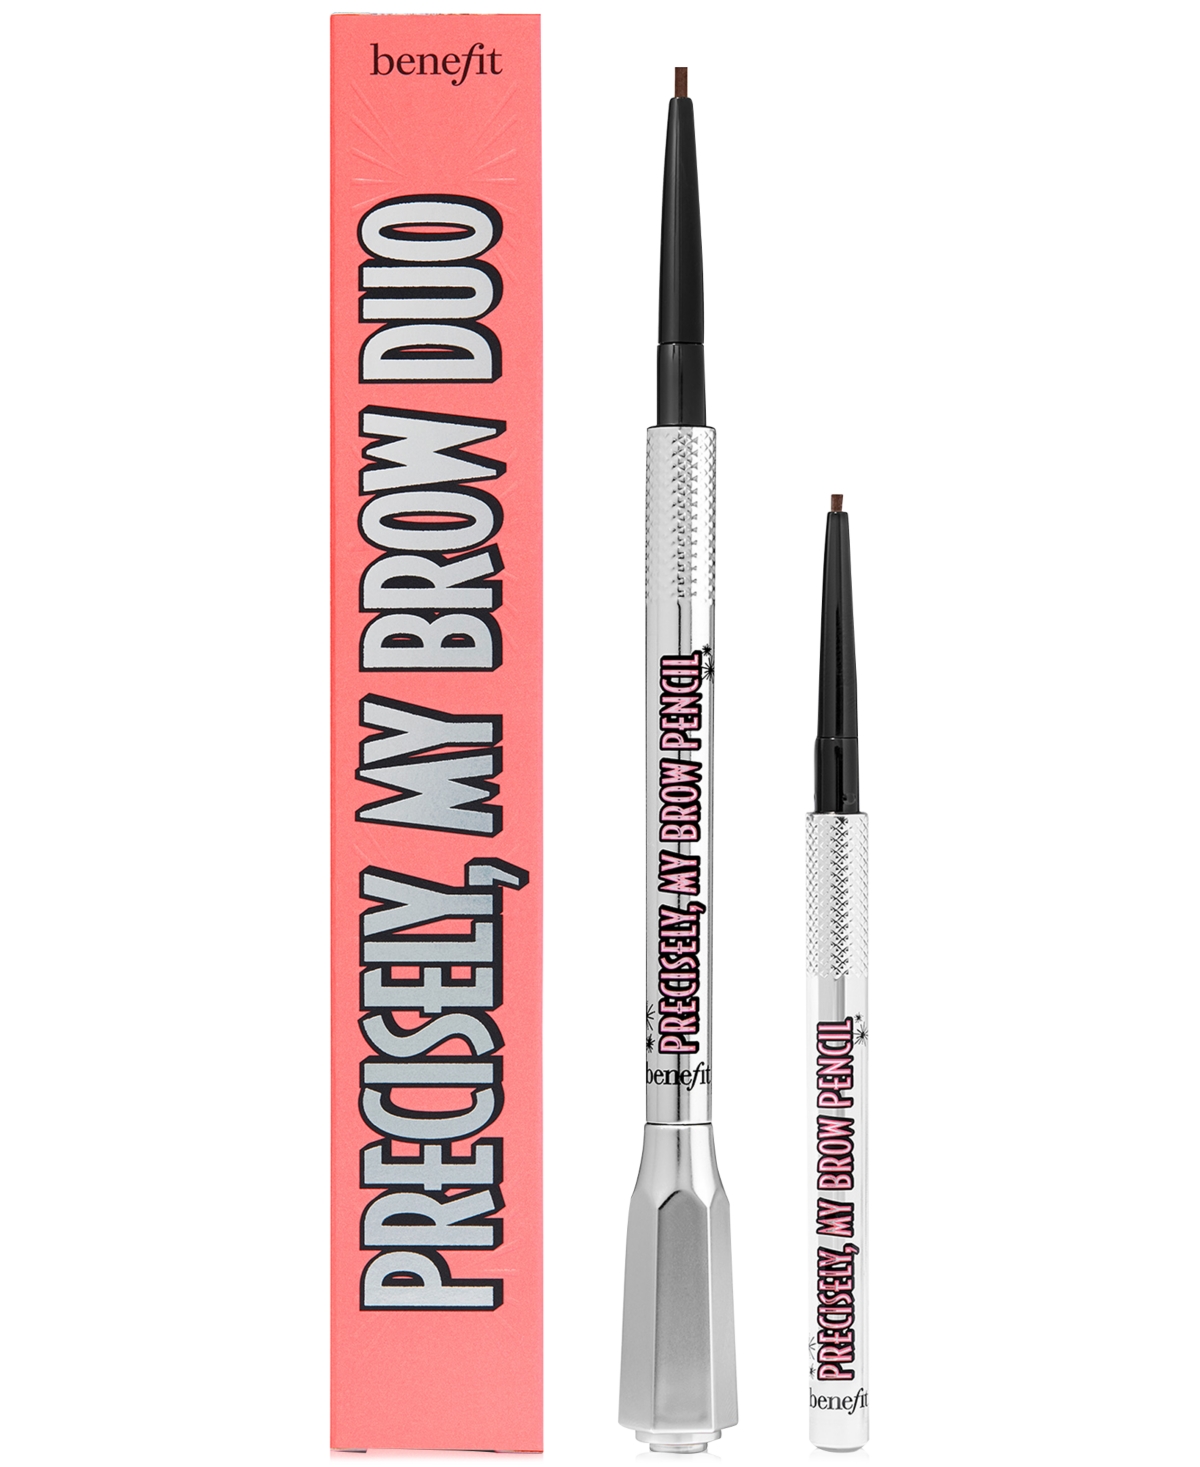 Benefit Cosmetics 2-pc. Precisely, My Brow Defining Eyebrow Pencil Set In Warm Black-brown